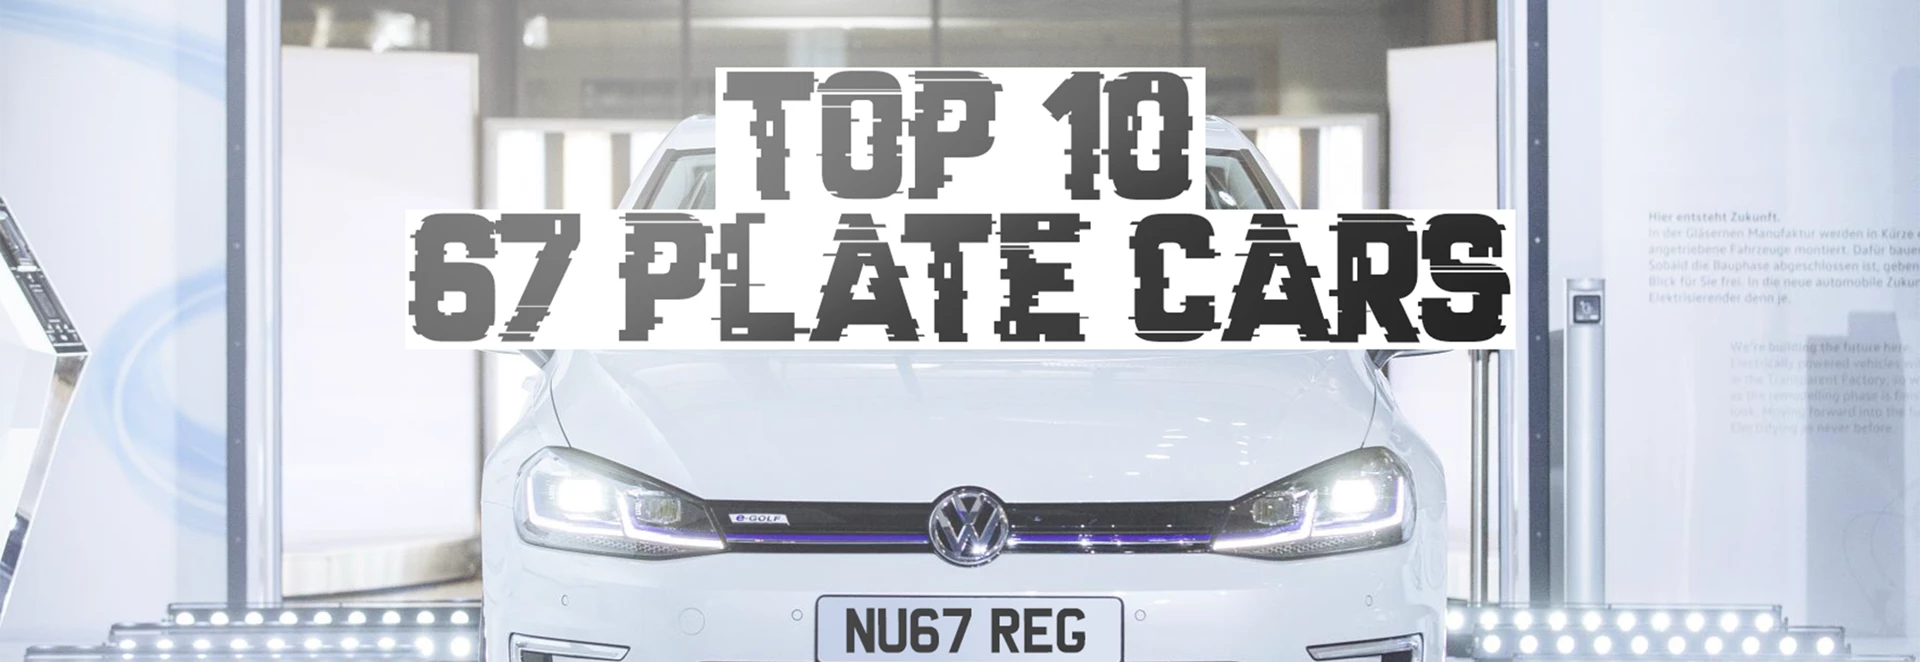 67 plate cars: Here’s the top 10 most likely to be in demand 